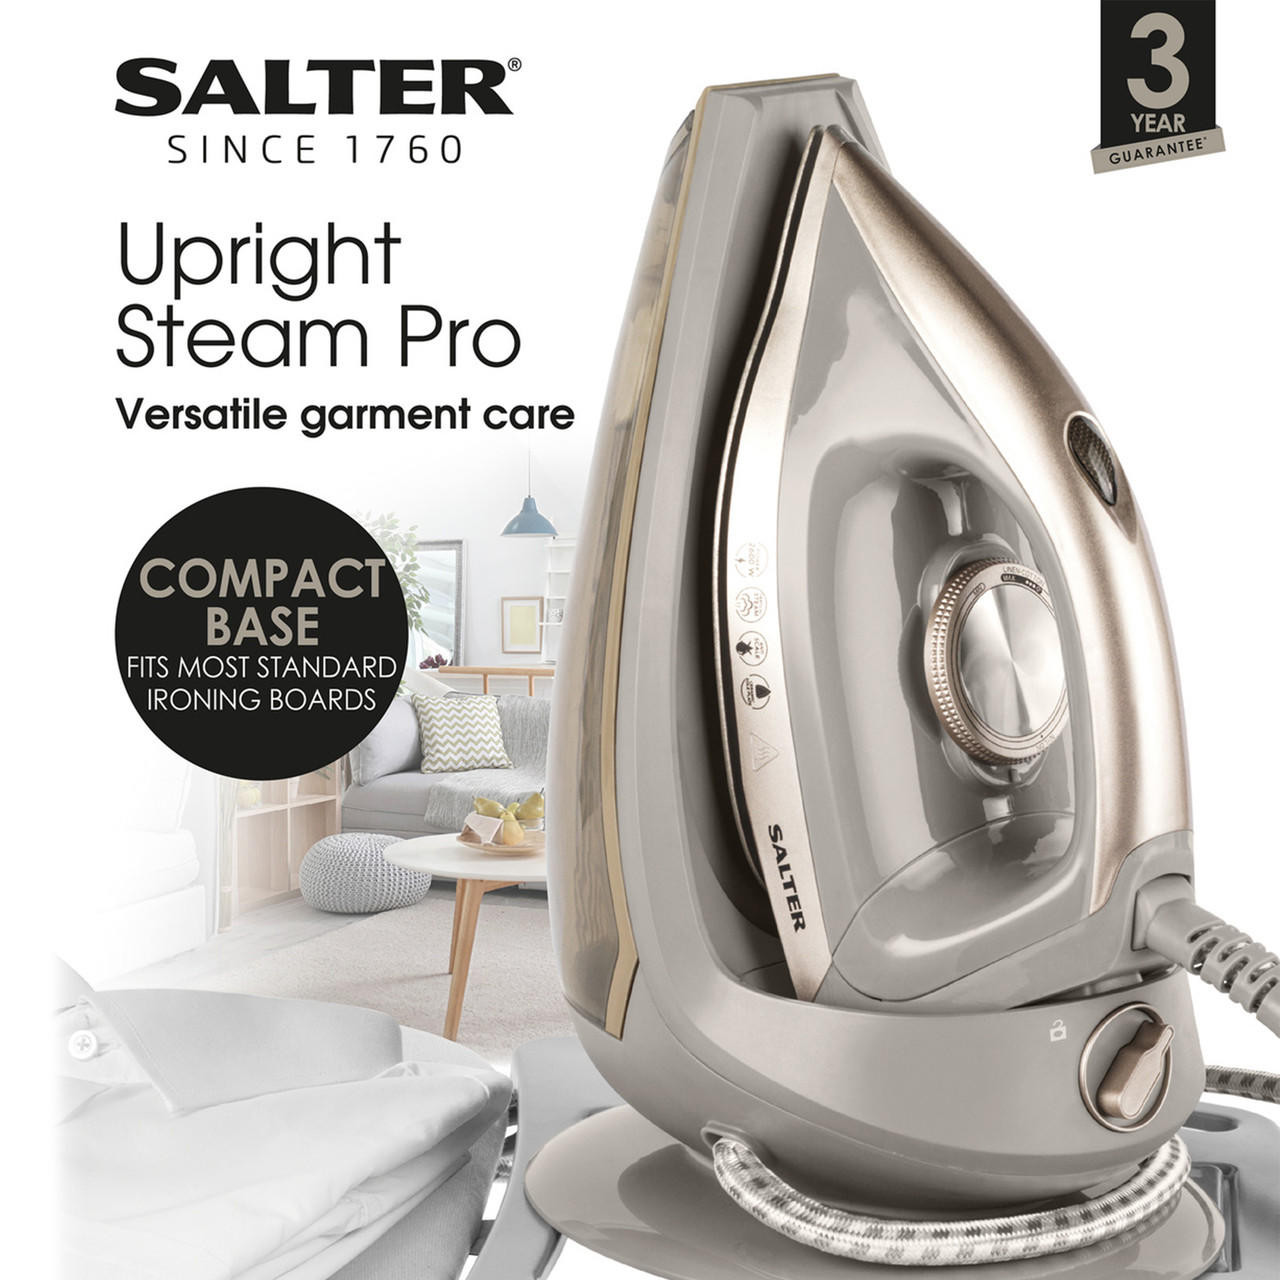 https://cdn11.bigcommerce.com/s-5vfc75n1yv/images/stencil/1280x1280/products/2981/26458/upright-steam-iron-with-ceramic-soleplate-1.5l-salter-sal01483-5054061210491__07457.1698134043.jpg?c=1